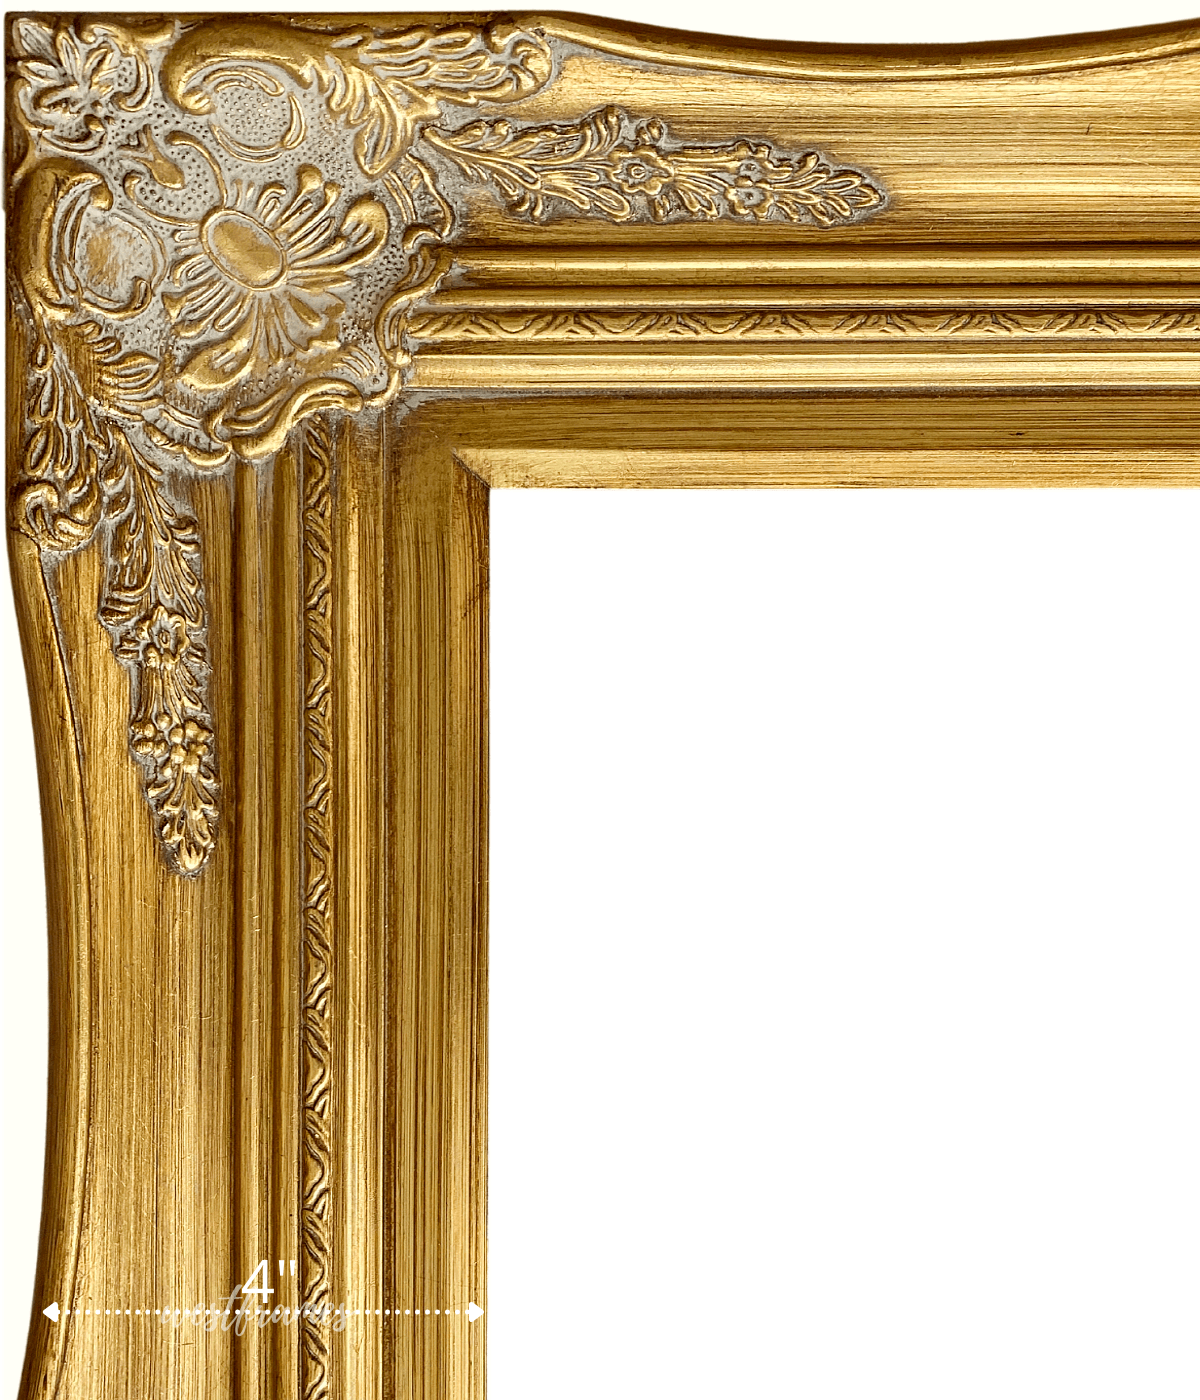 20x24 Gold Frames, Large Ornate Baroque Picture Frame, Classic Victorian  Photo Frame, Wedding Frame, Framing Painting Artwork Home Ideas 